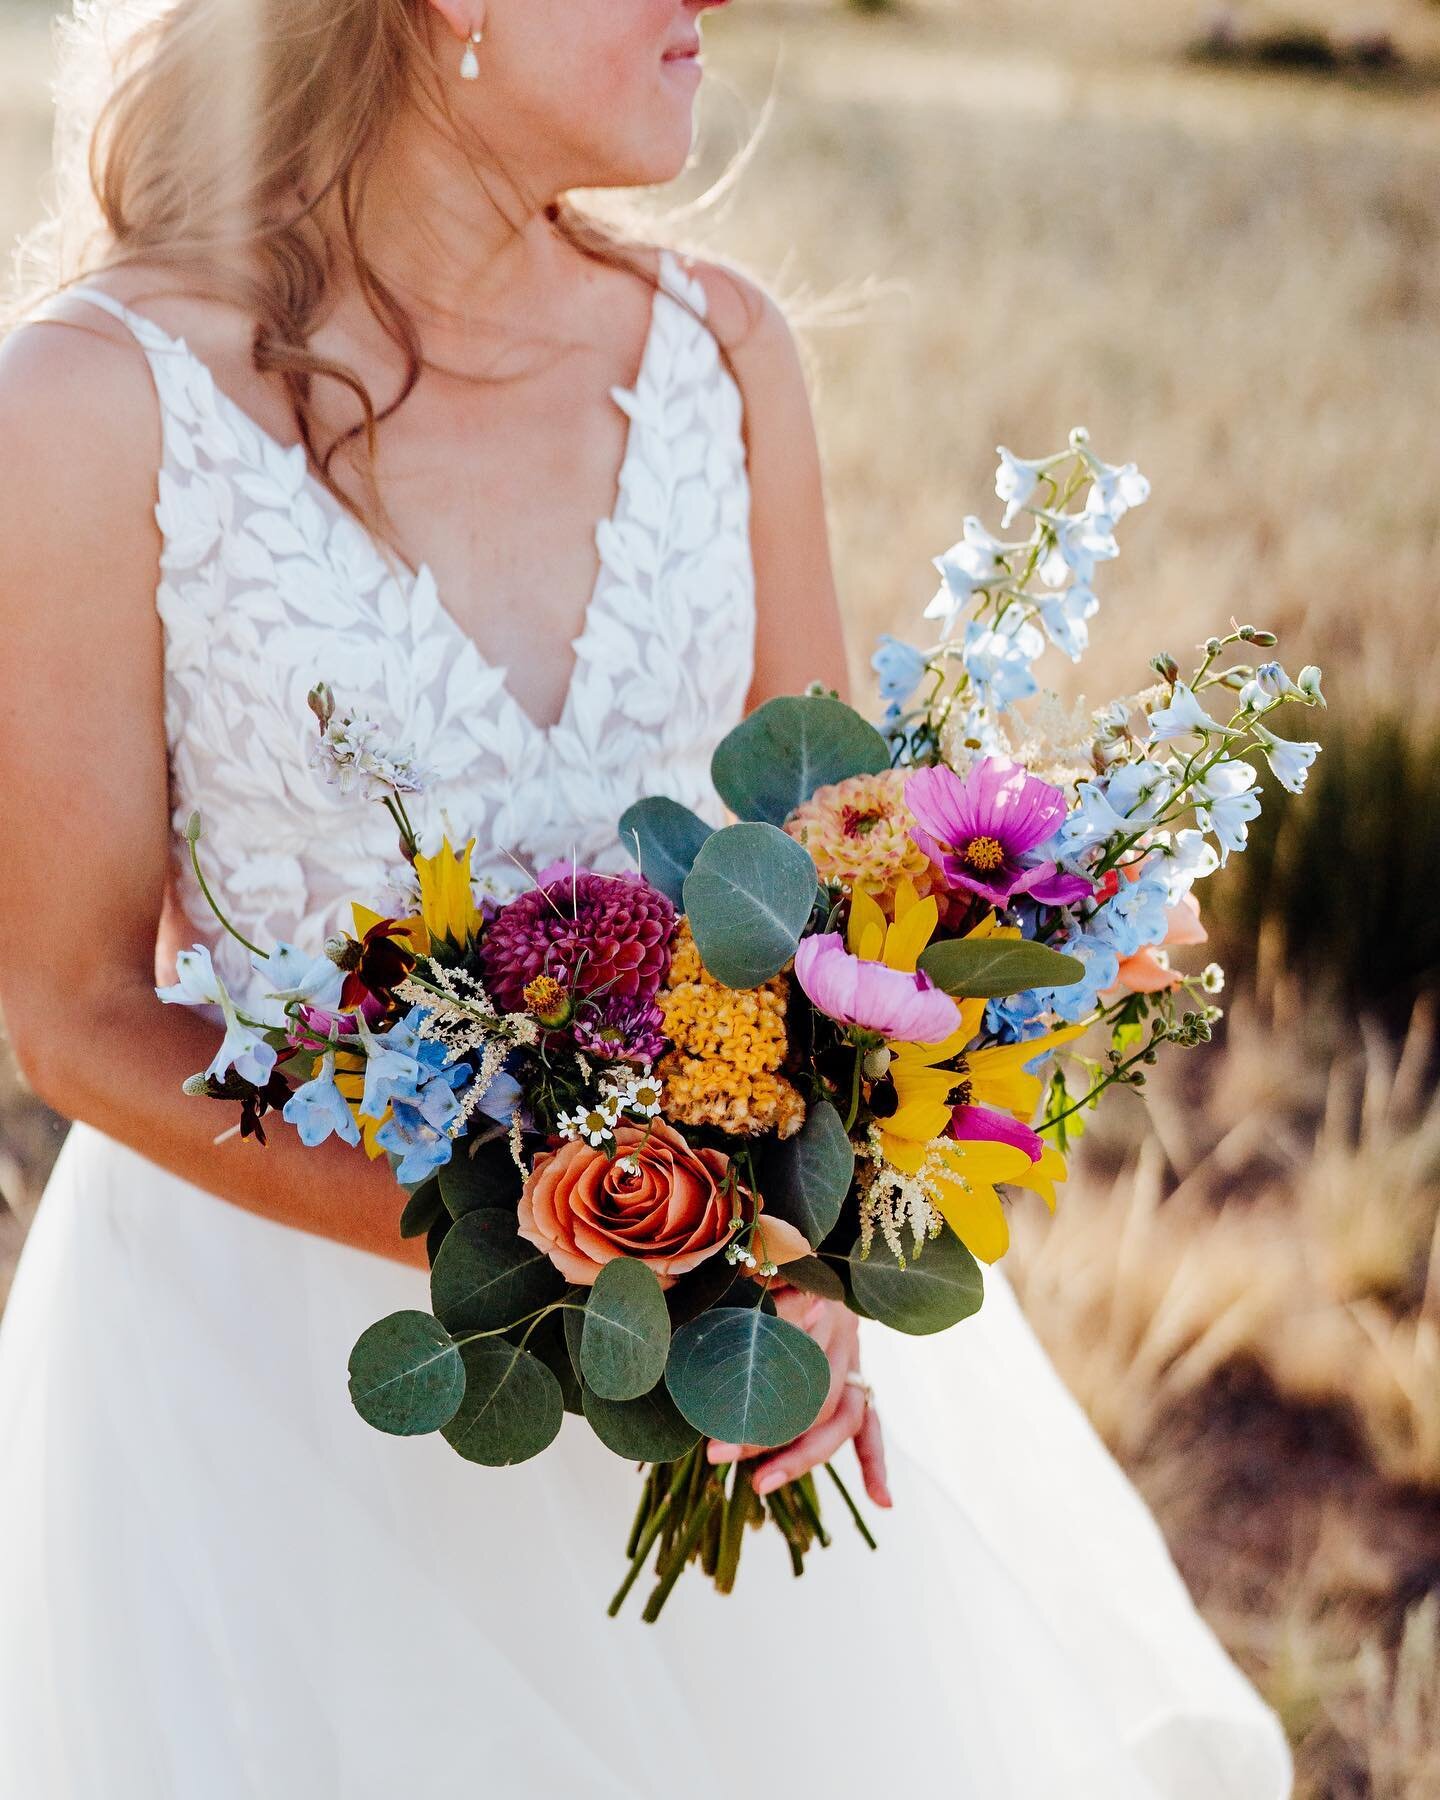 All the summery wildflower feels for Charis+Max 🌞💐

They were wanting all the wildflower vibes, and trusted us completely to design our hearts out. We had a slow start to the farm flower season, but they showed up just in time to help us create rea